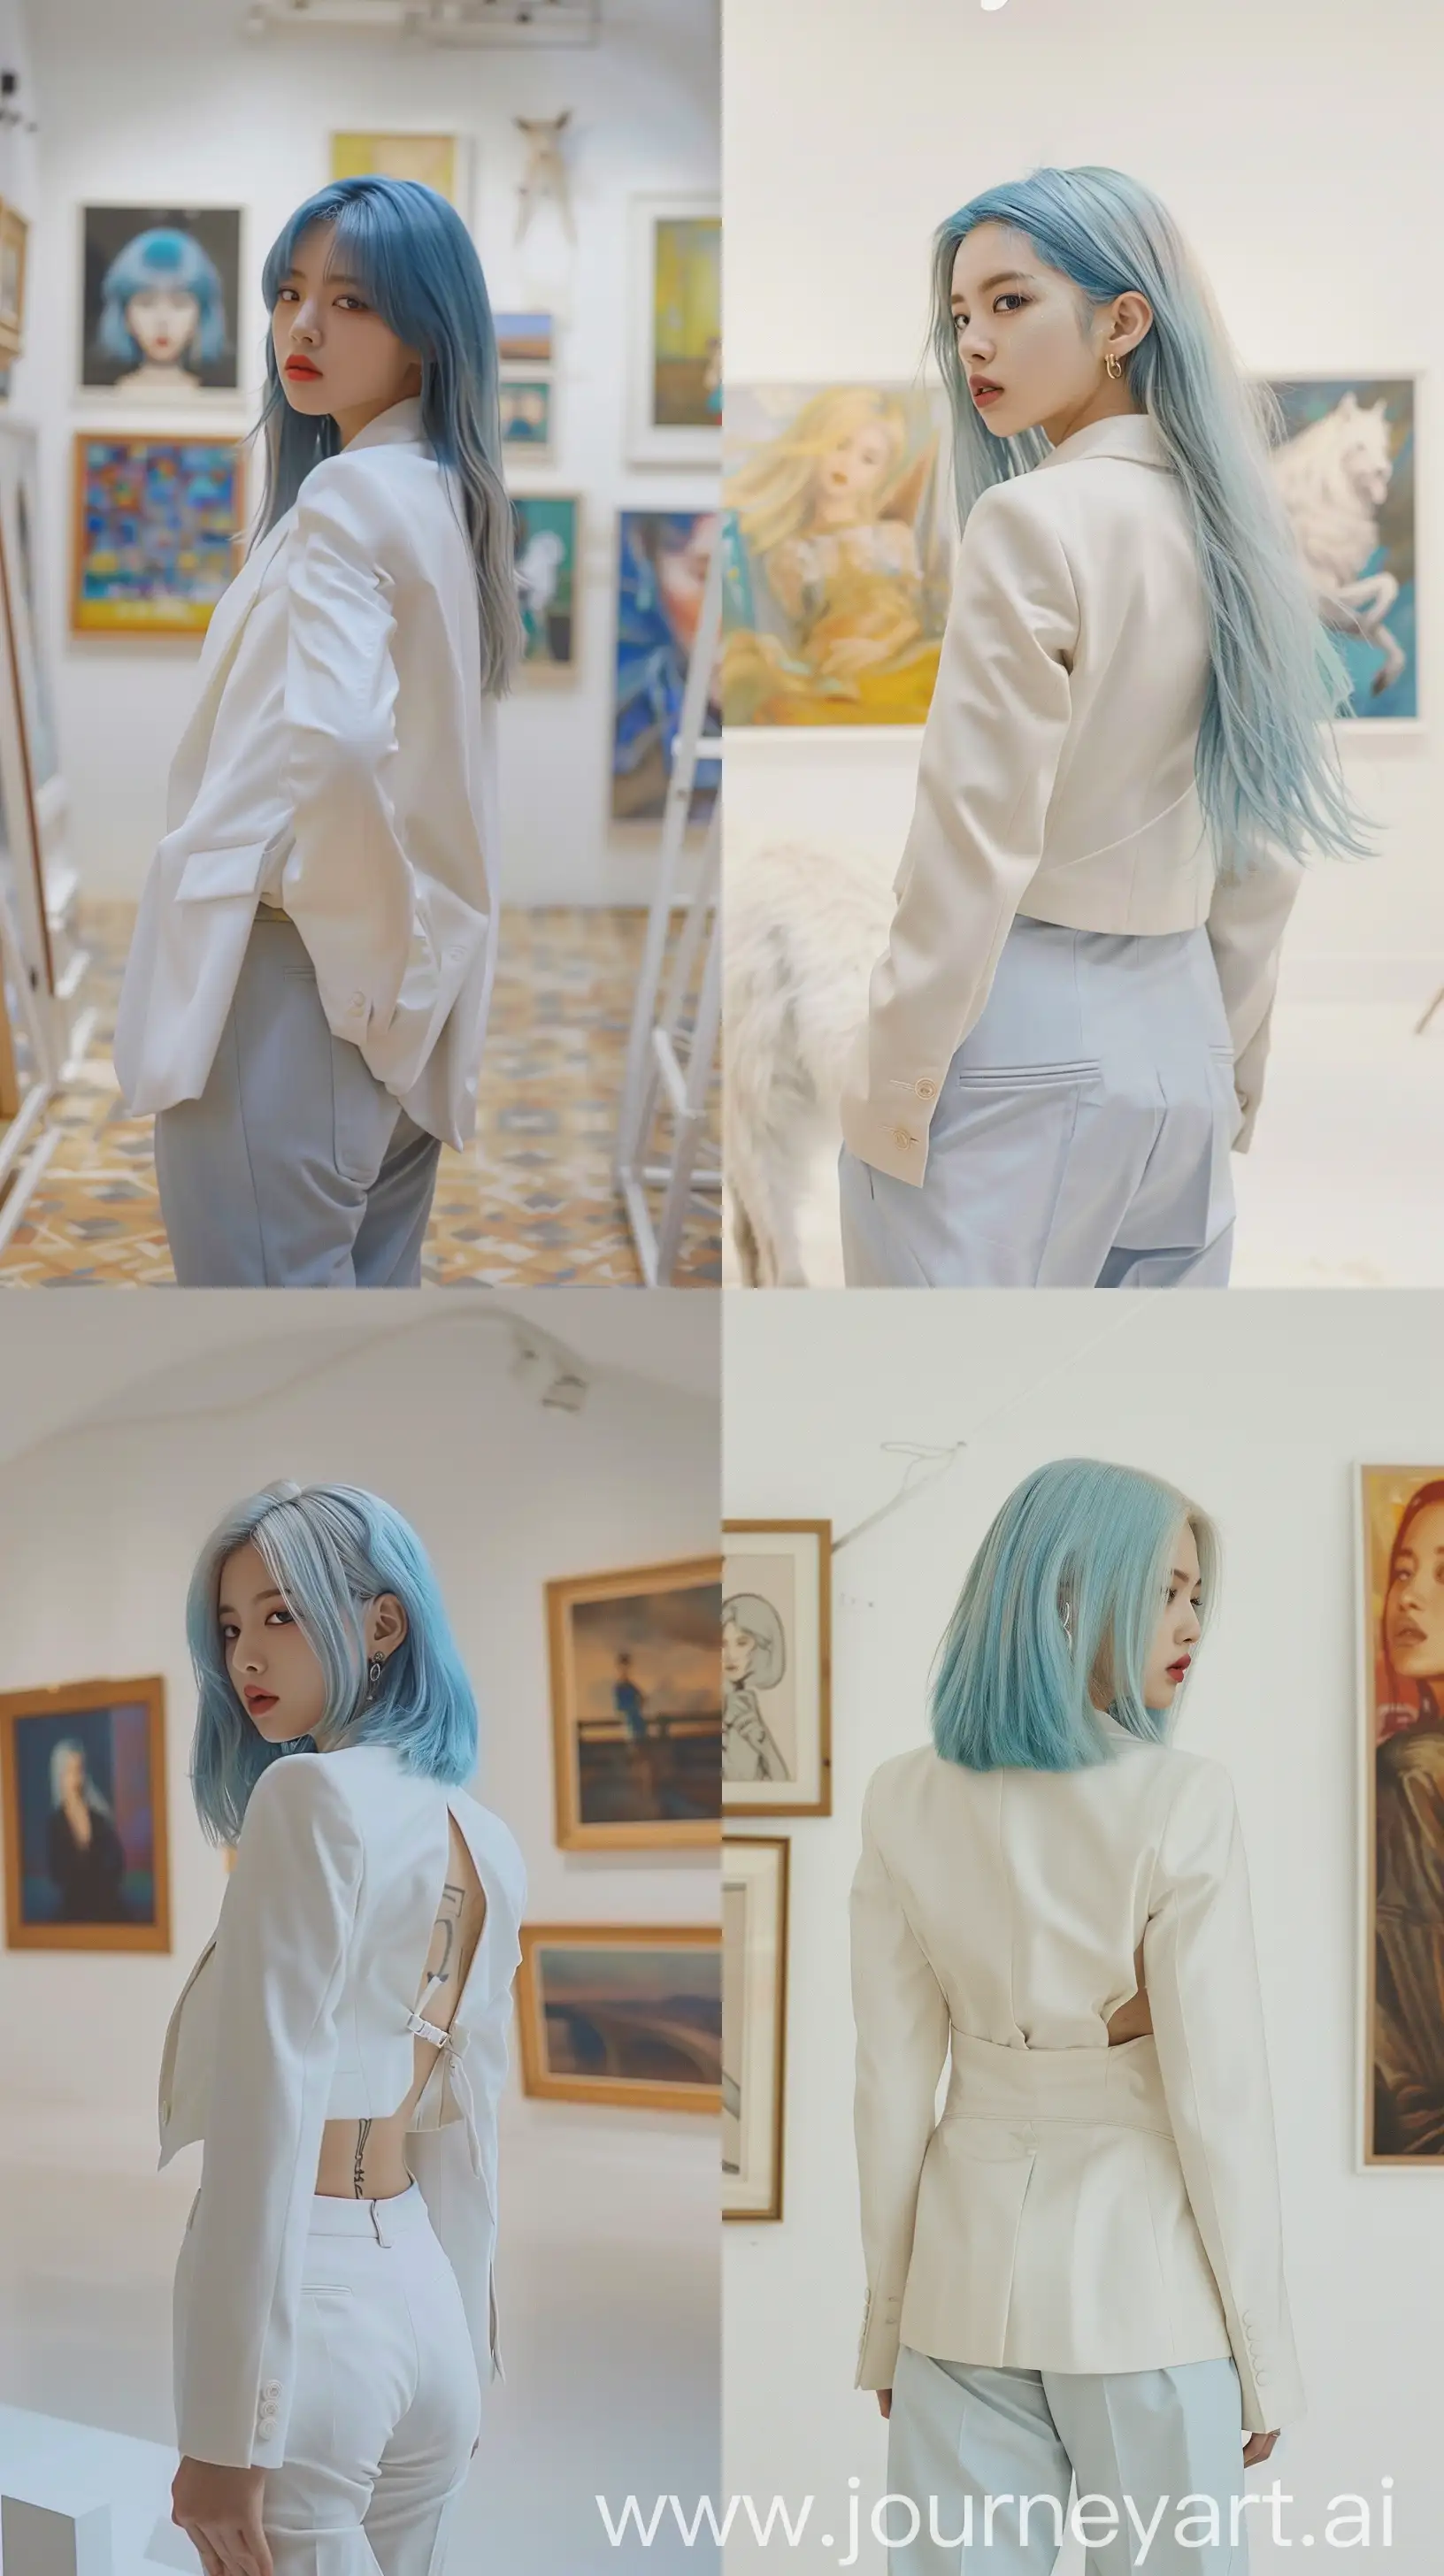 Blackpinks-Jennie-Portrait-in-Art-Gallery-Blue-Wolfcut-Hair-and-Chic-White-Suit-Pants